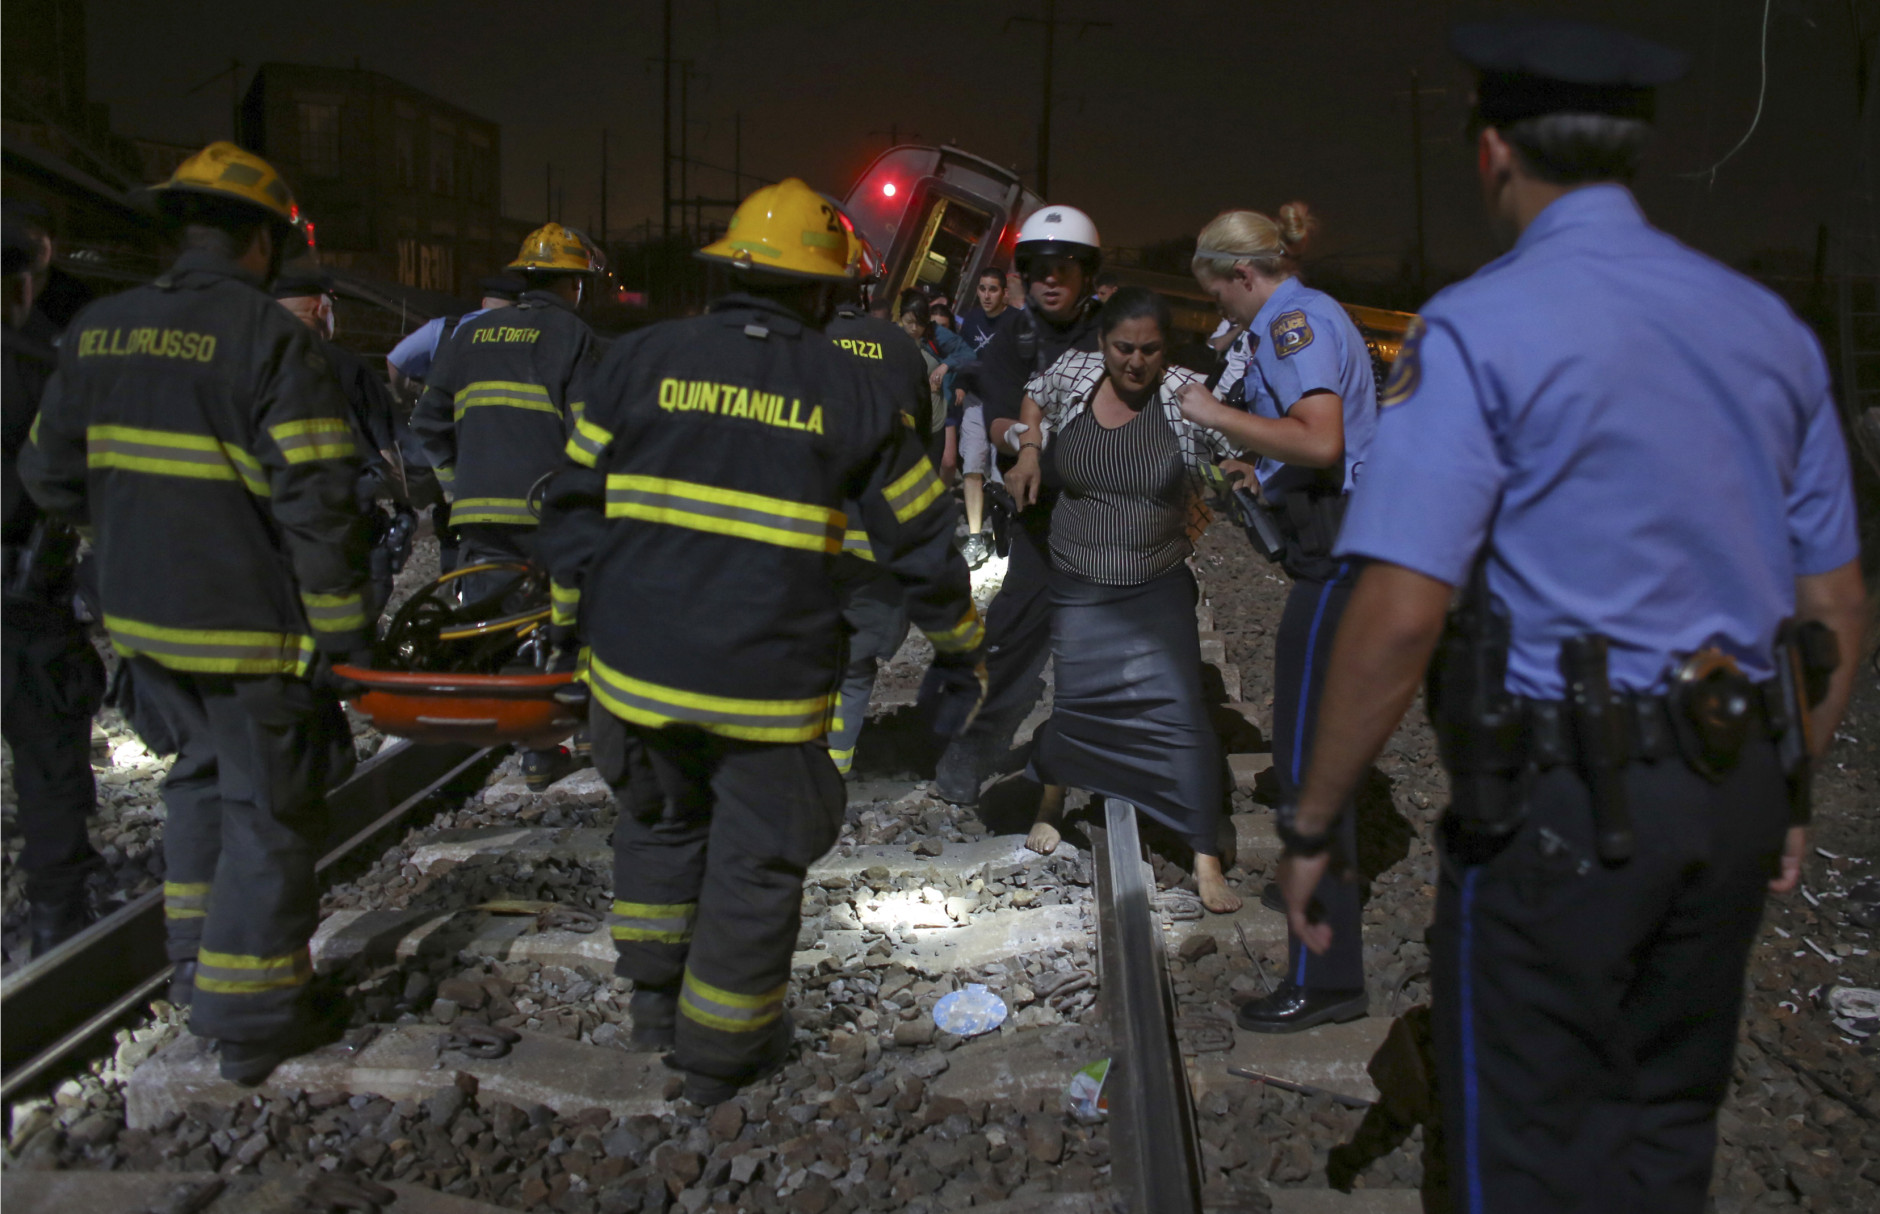 Emergency personnel help passengers at the scene of a train wreck, Tuesday, May 12, 2015, in Philadelphia. An Amtrak train headed to New York City derailed and crashed in Philadelphia. (AP Photo/Joseph Kaczmarek)